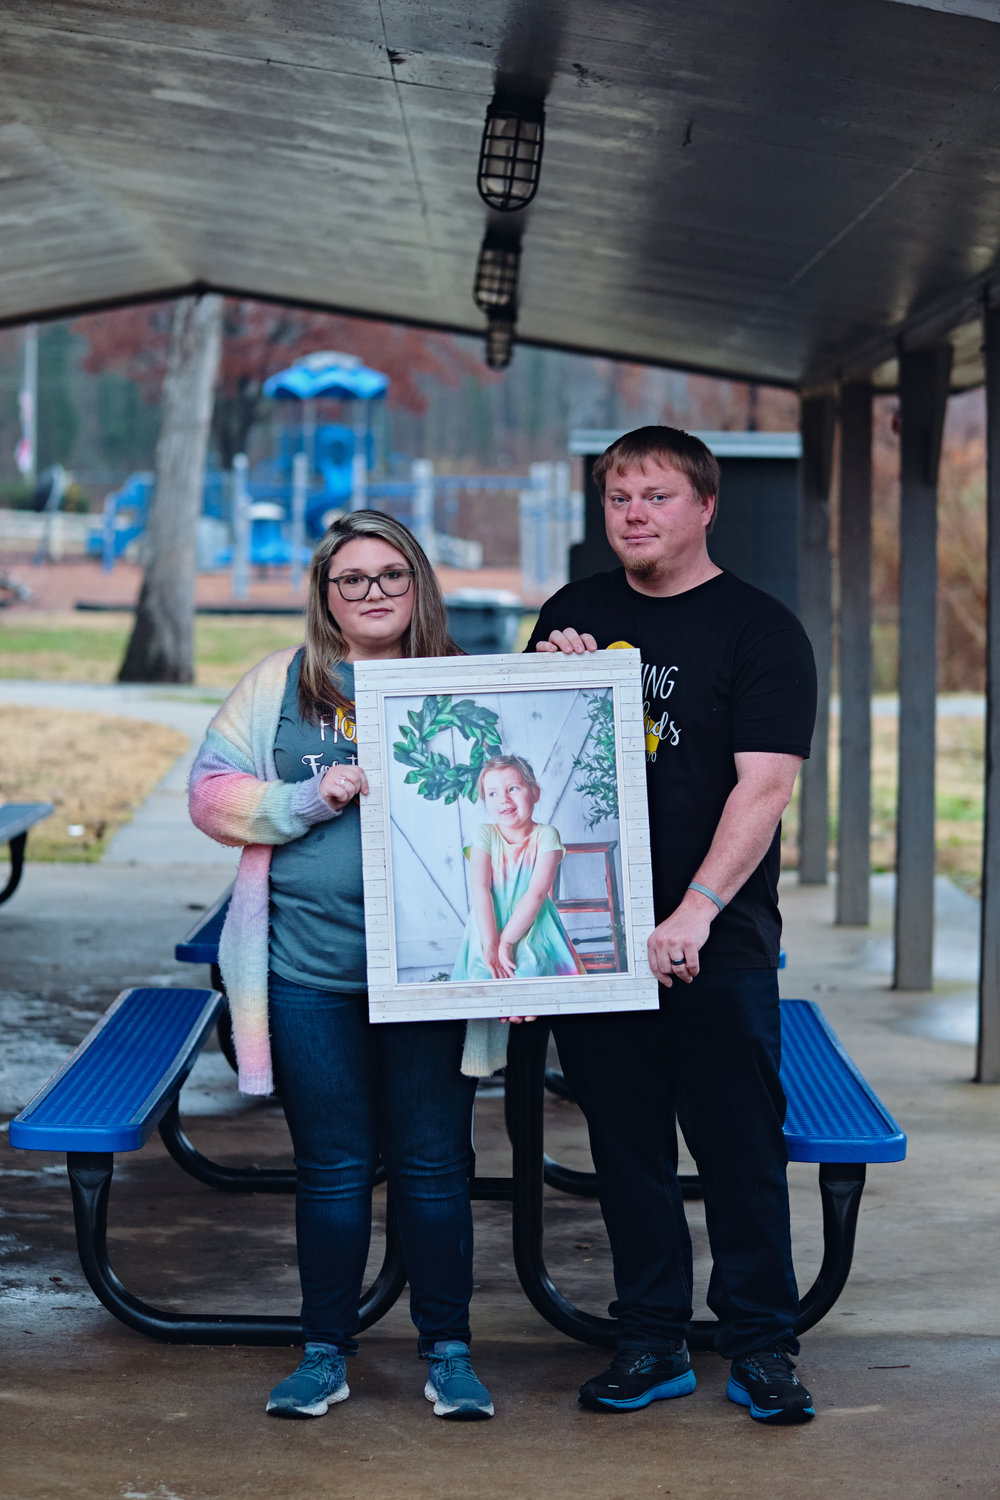 Meghan and Dusty Scoggins pose with a framed photo of their 5-year-old daughter Kenzie, who died from an aggressive childhood brain tumor called diffuse intrinsic pontine glioma (DIPG) on Sept. 18.